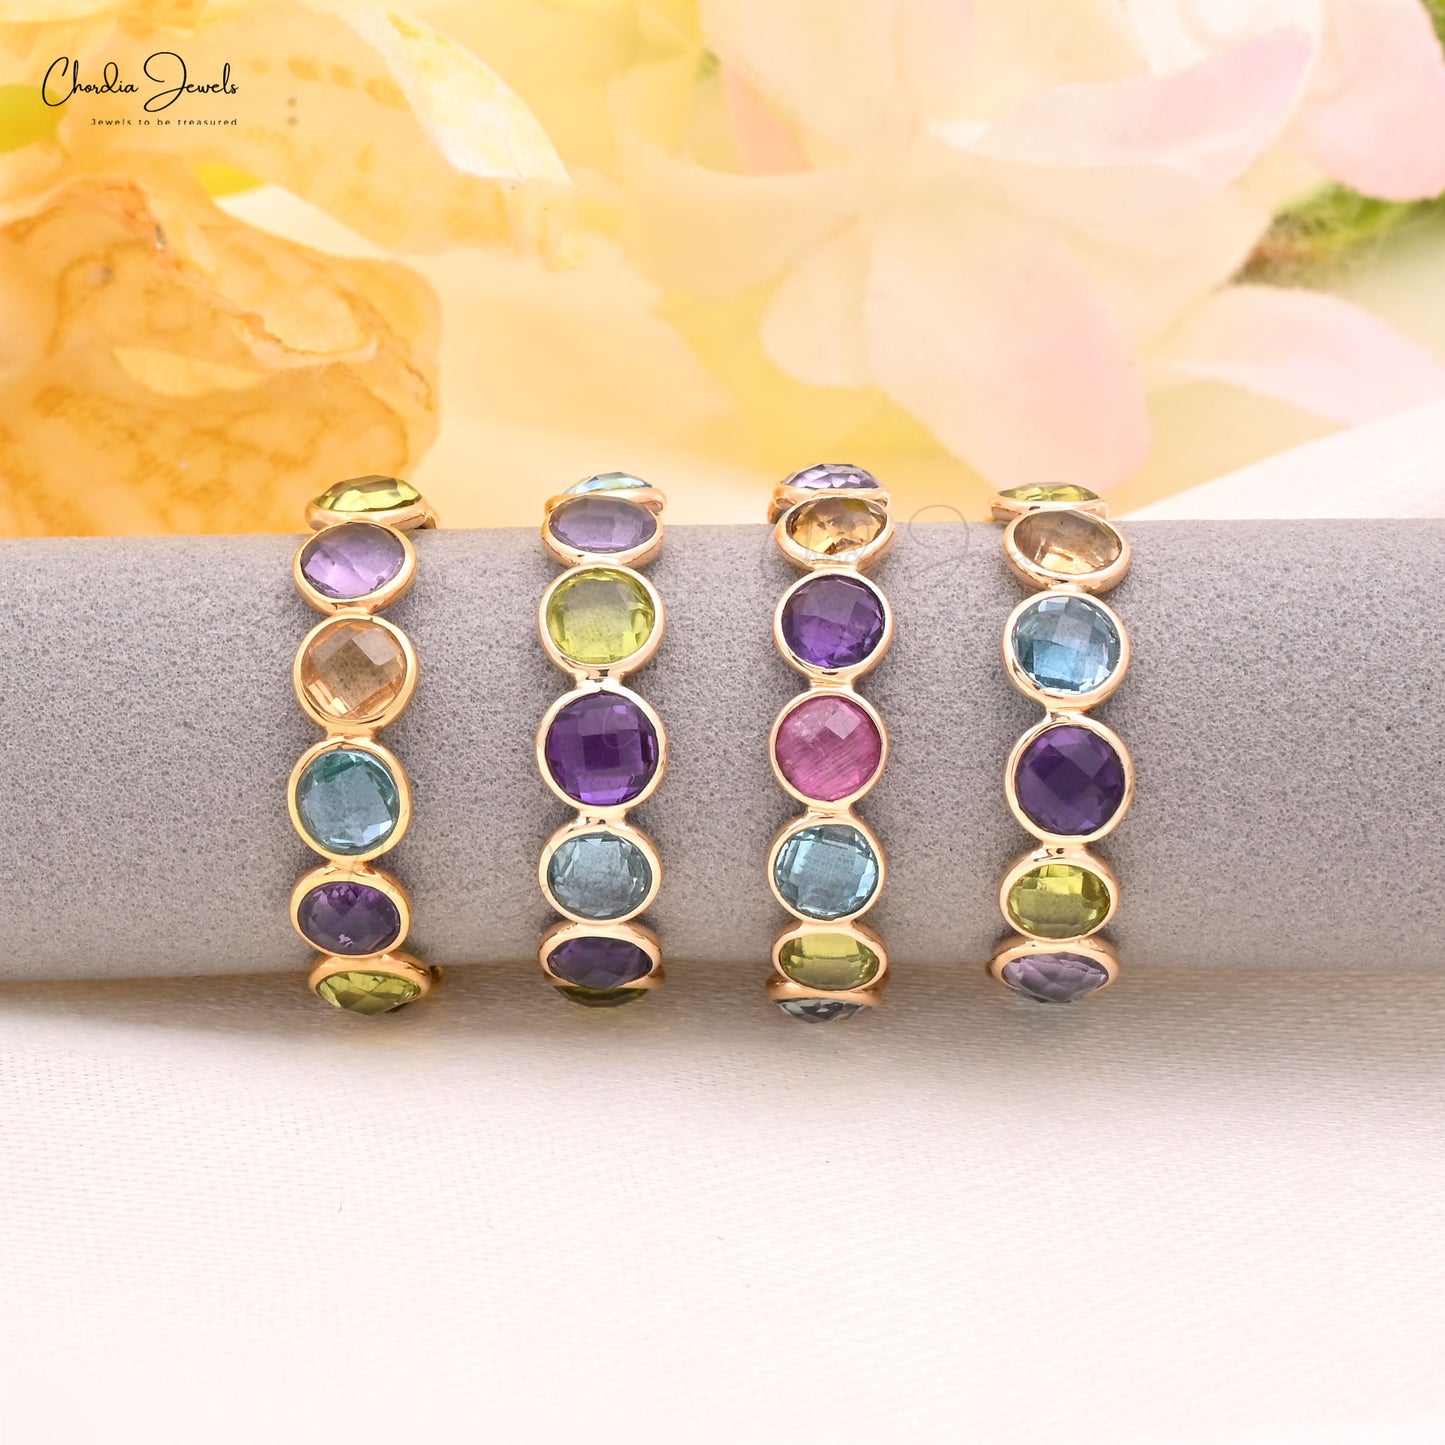 Genuine 4mm Multi Gemstones Eternity Ring 14K Solid Yellow Gold Fine Stone Ring Size-US 6